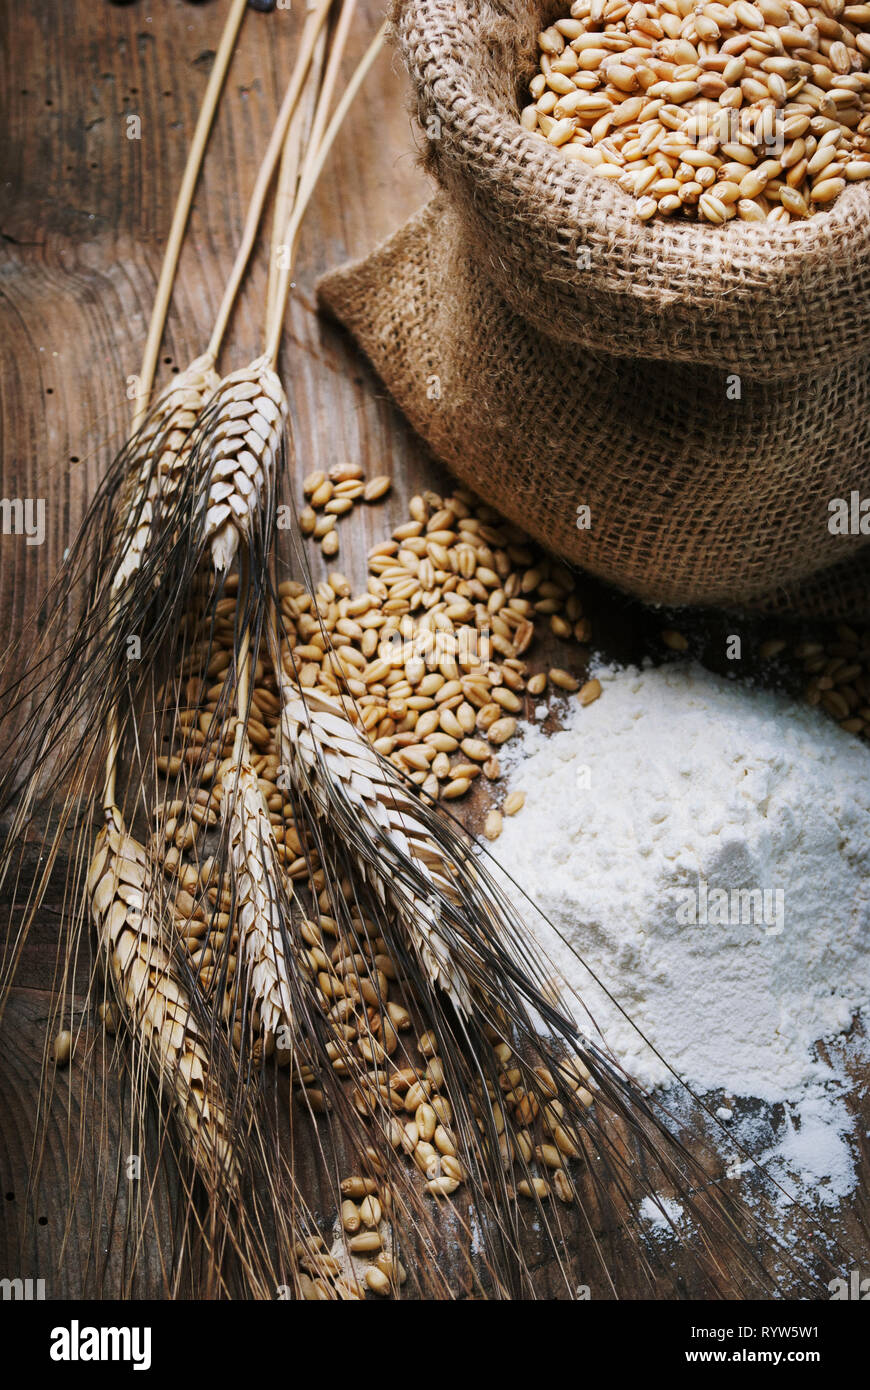 Vintage still life with organic flour, whole wheat grain in retro bag and wheat ears on rustic wooden table. Stock Photo